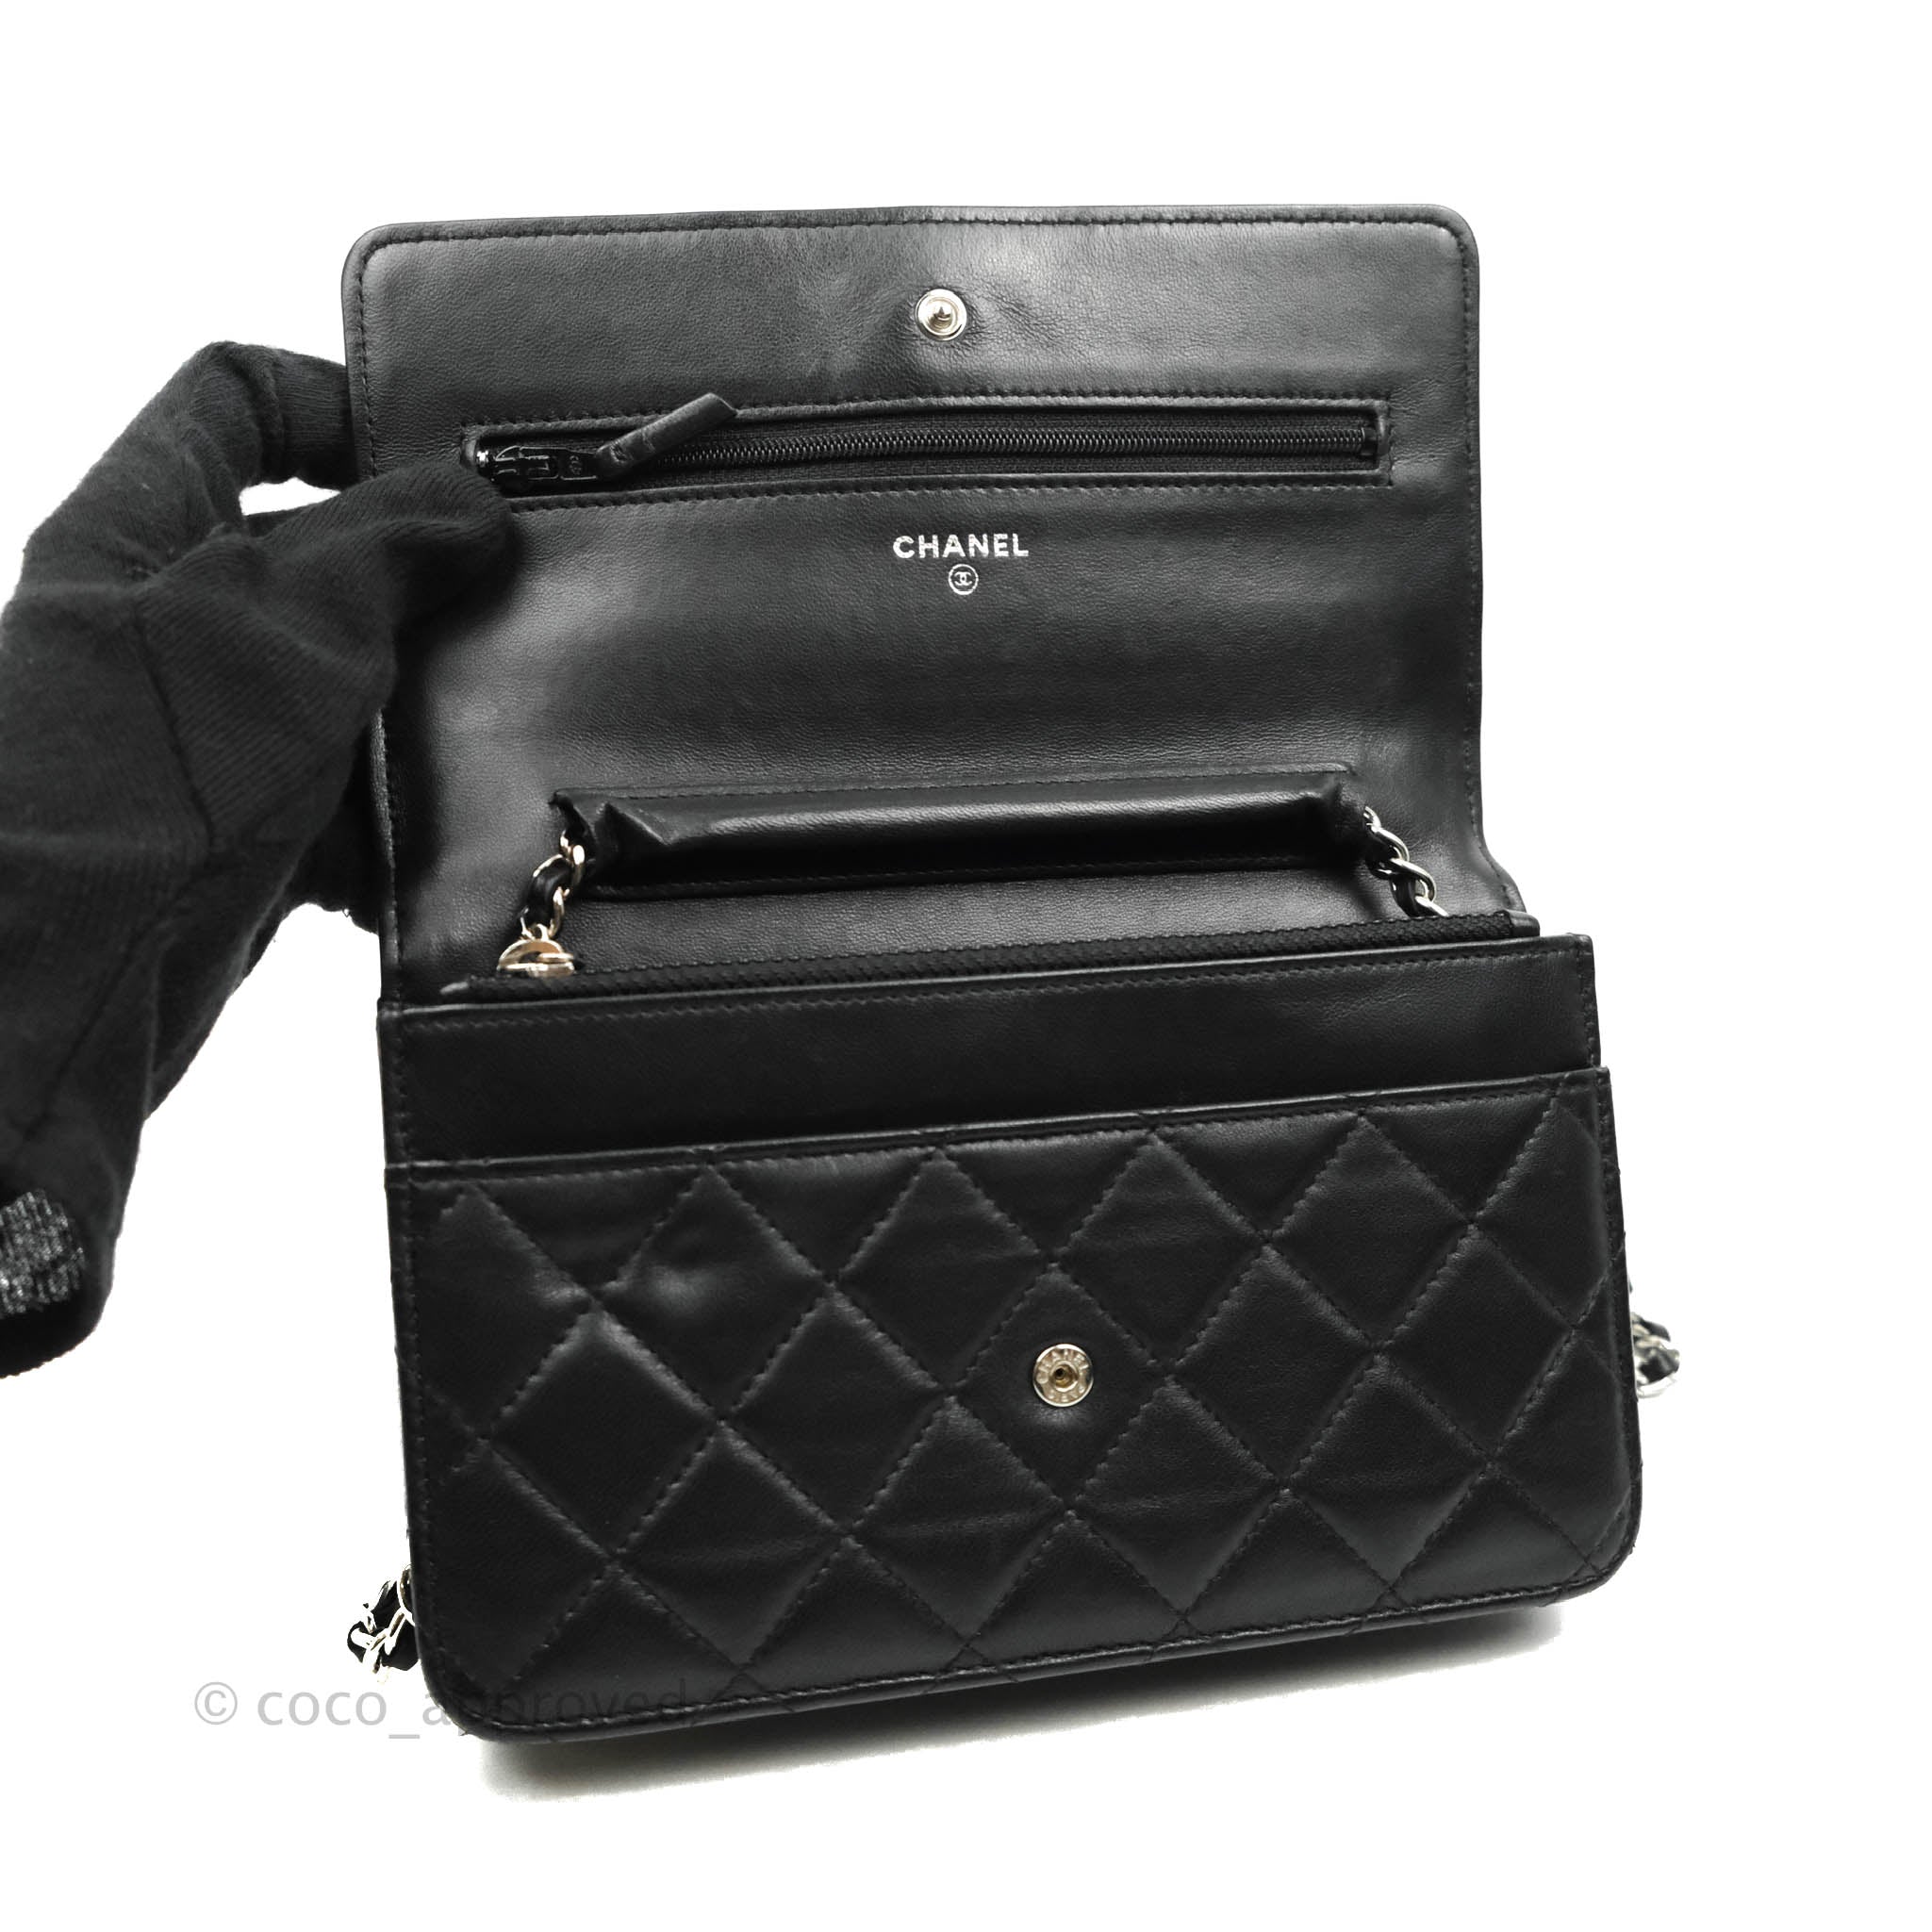 Chanel Black Quilted Patent Woc Wallet on Chain Silver Hardware, 2009-2010, Womens Handbag